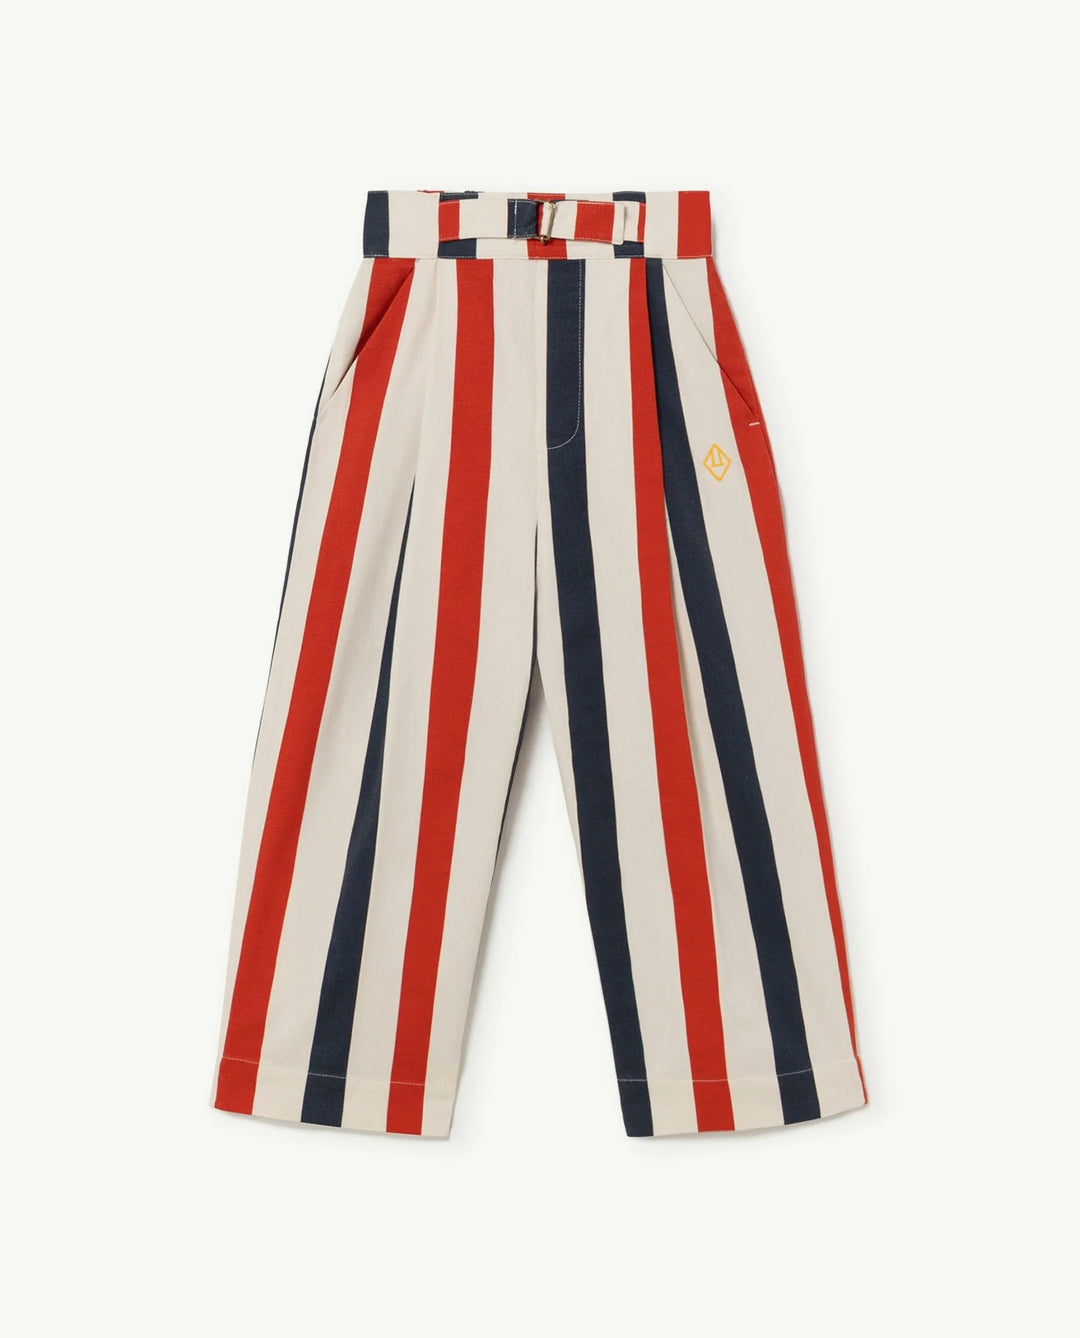 THE ANIMALS OBSERVATORY White Antelope Kids Pants